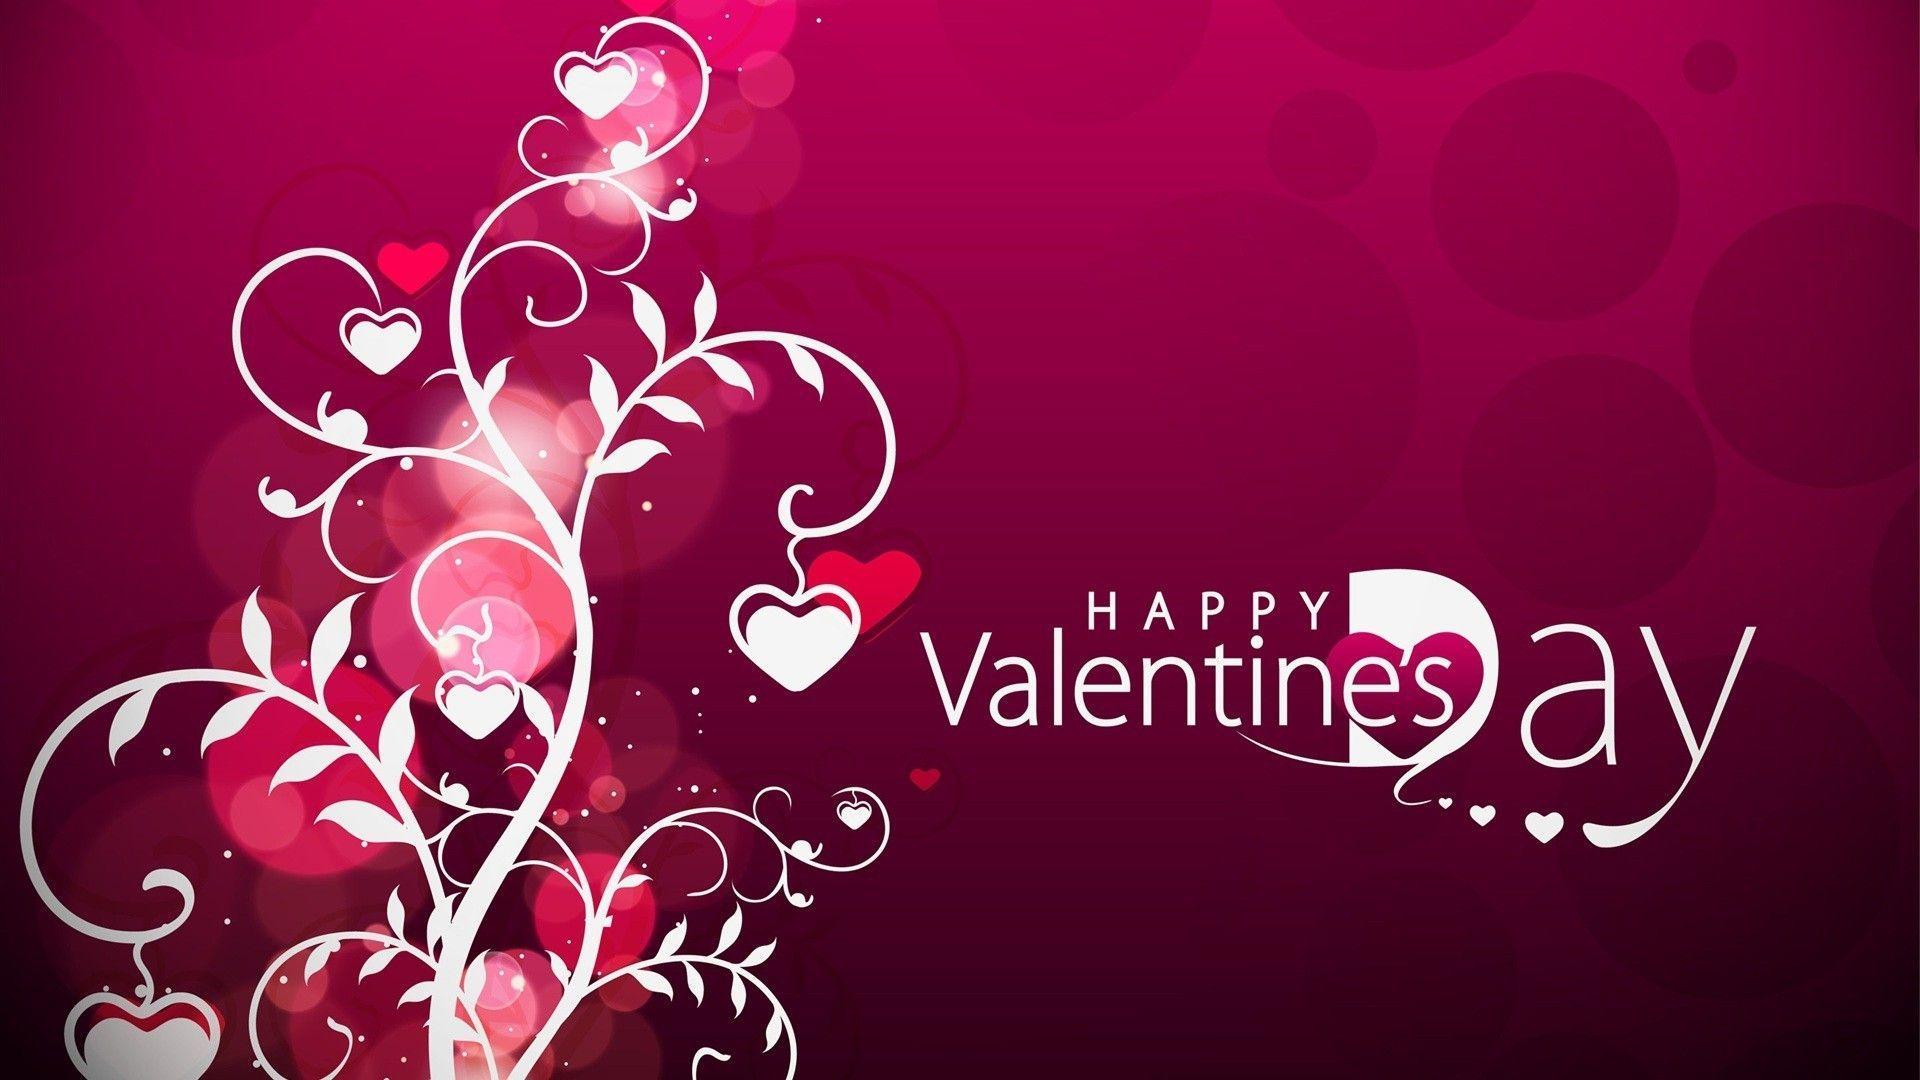 Valentines Day 2021 Wallpapers Wallpaper Cave 